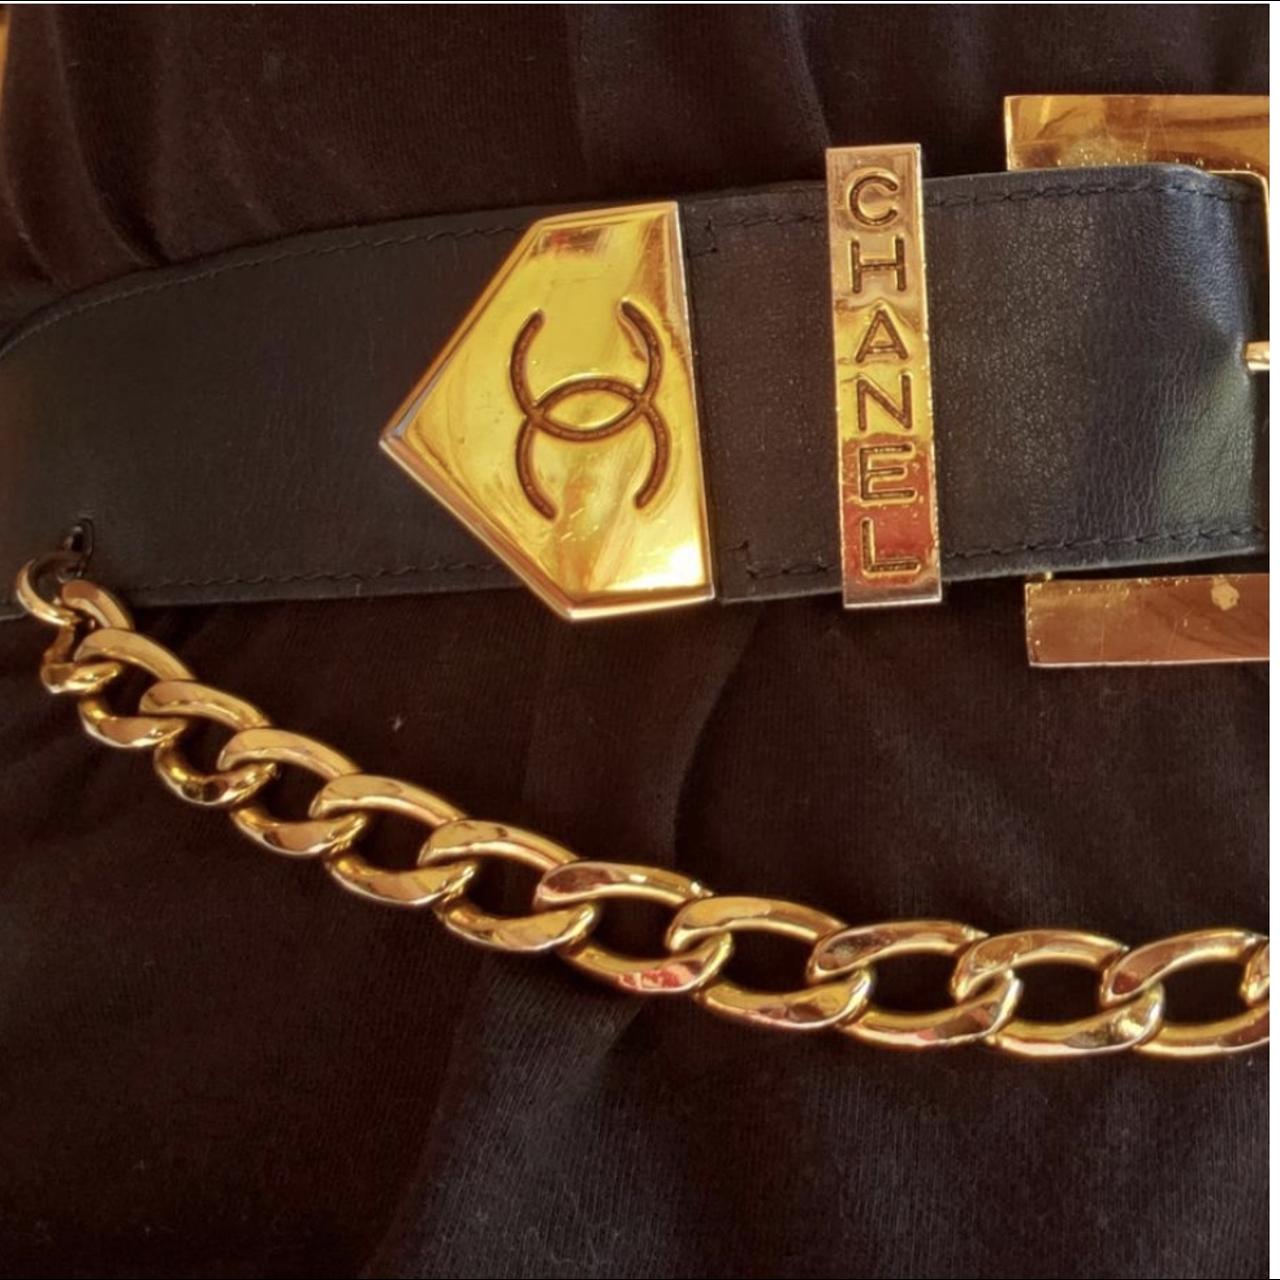 Authentic chanel belt/ necklace. Comes with box and - Depop